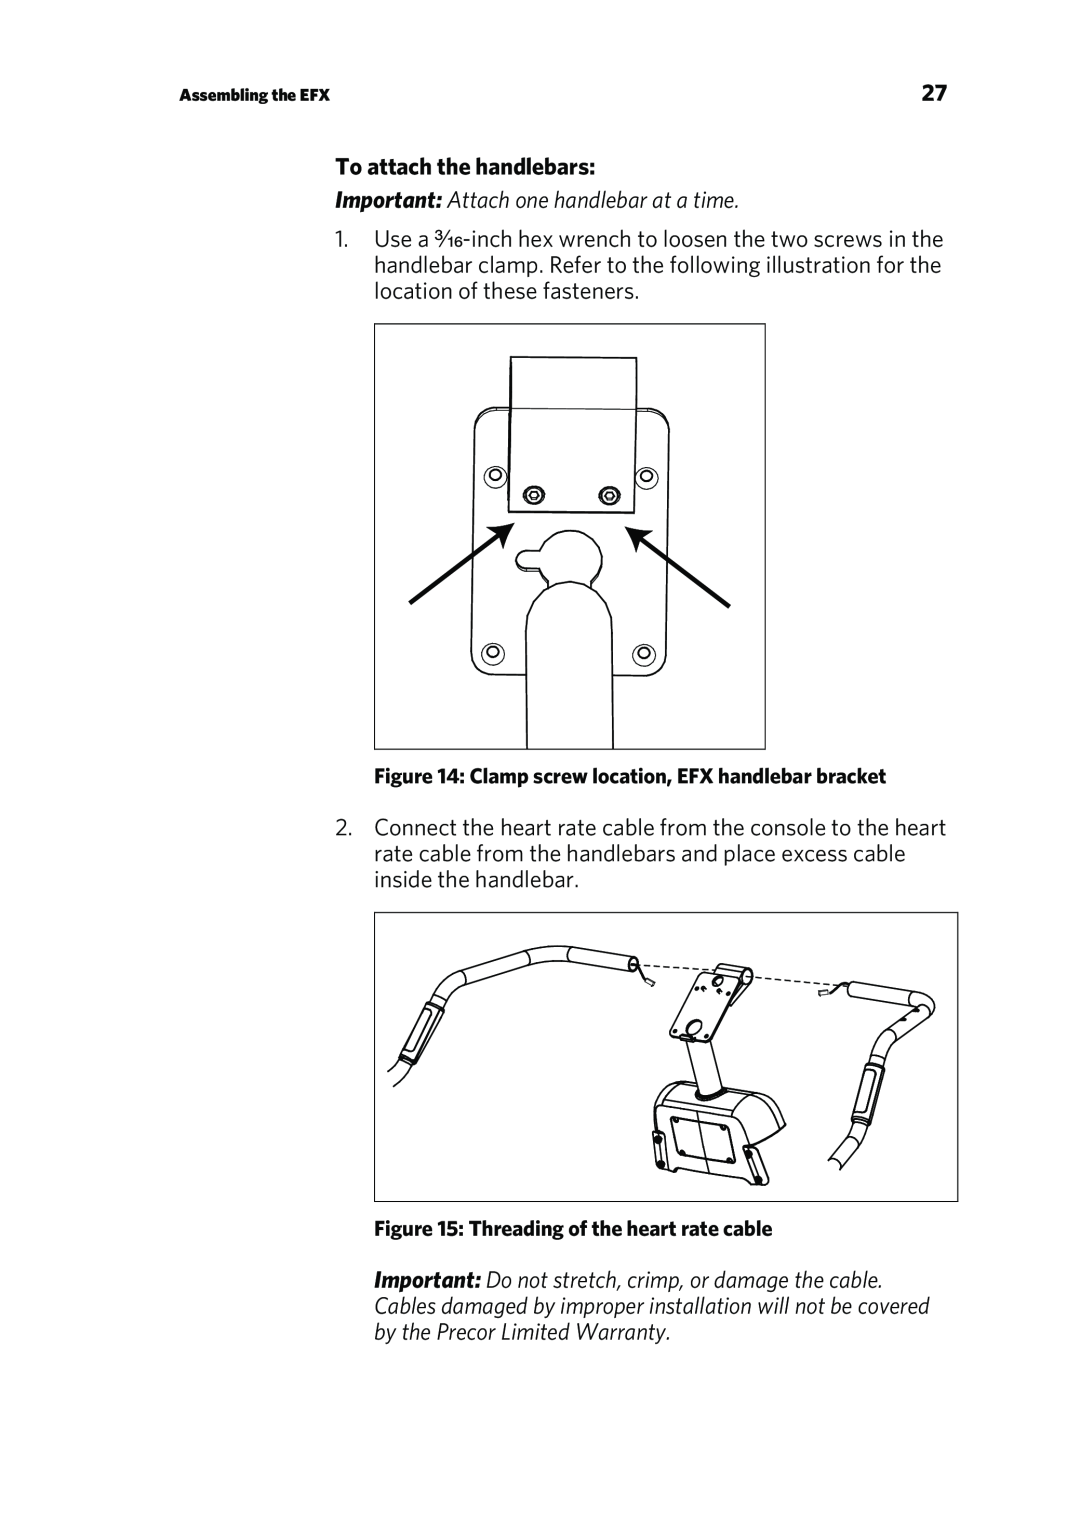 Precor P80 manual To attach the handlebars, Important: Attach one handlebar at a time 